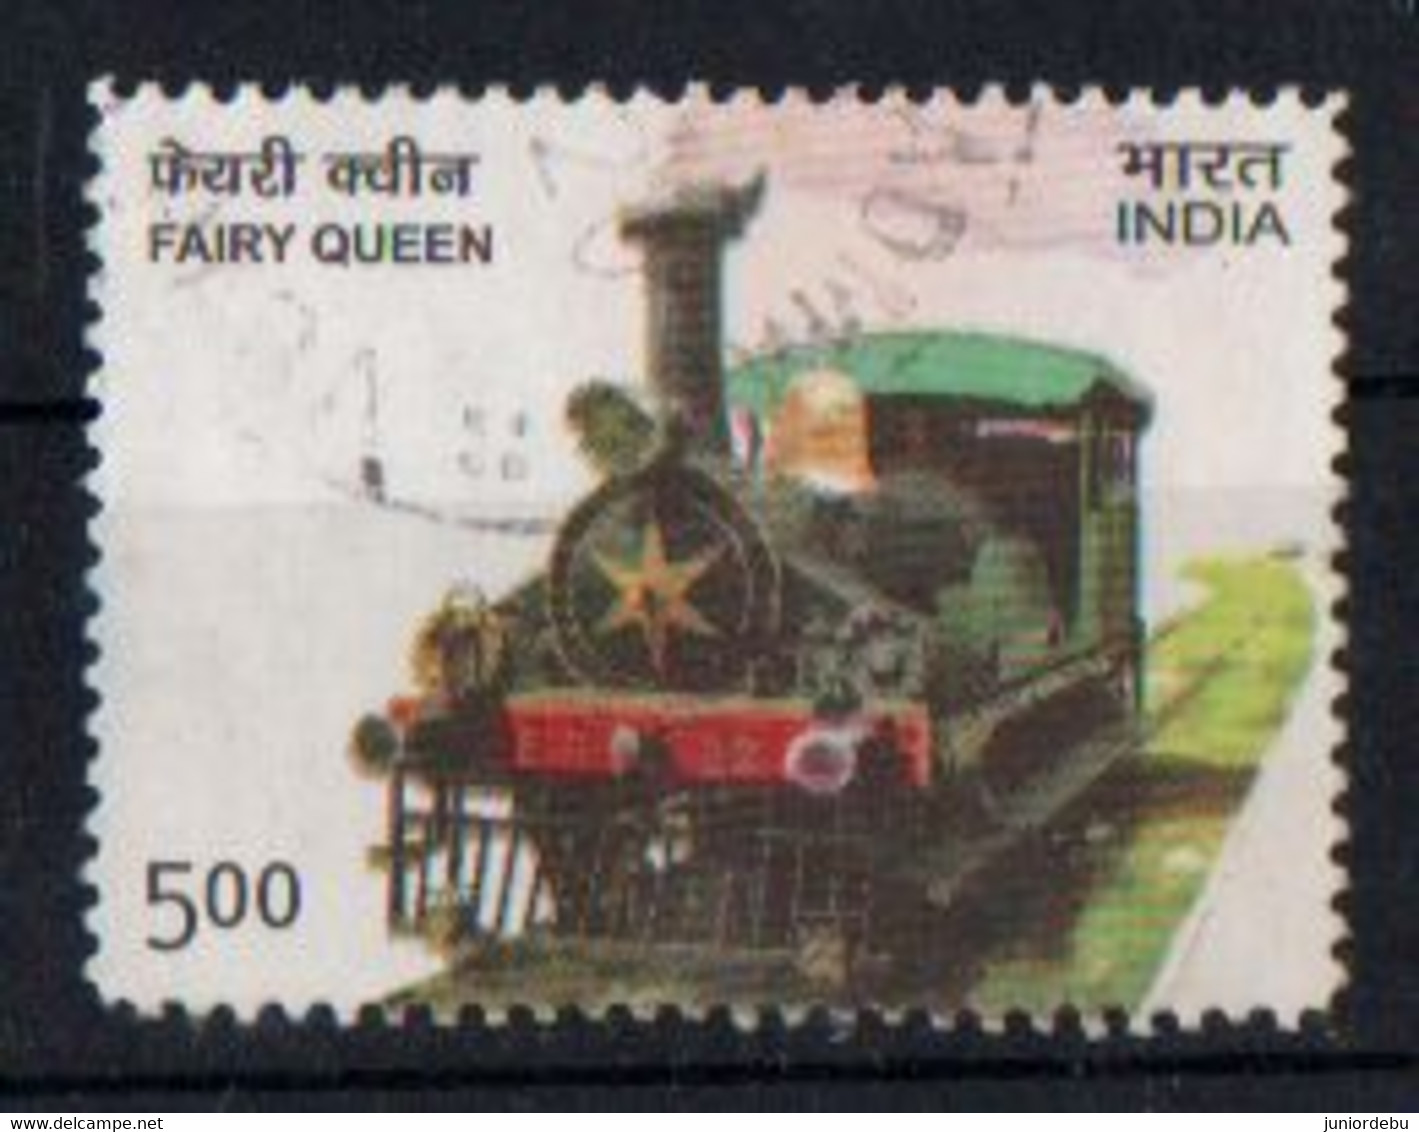 India - 2014 - My Stamp -  Fairy Queen    - Used ( Locomotive ) ( Condition As Per Scan ) - Used Stamps